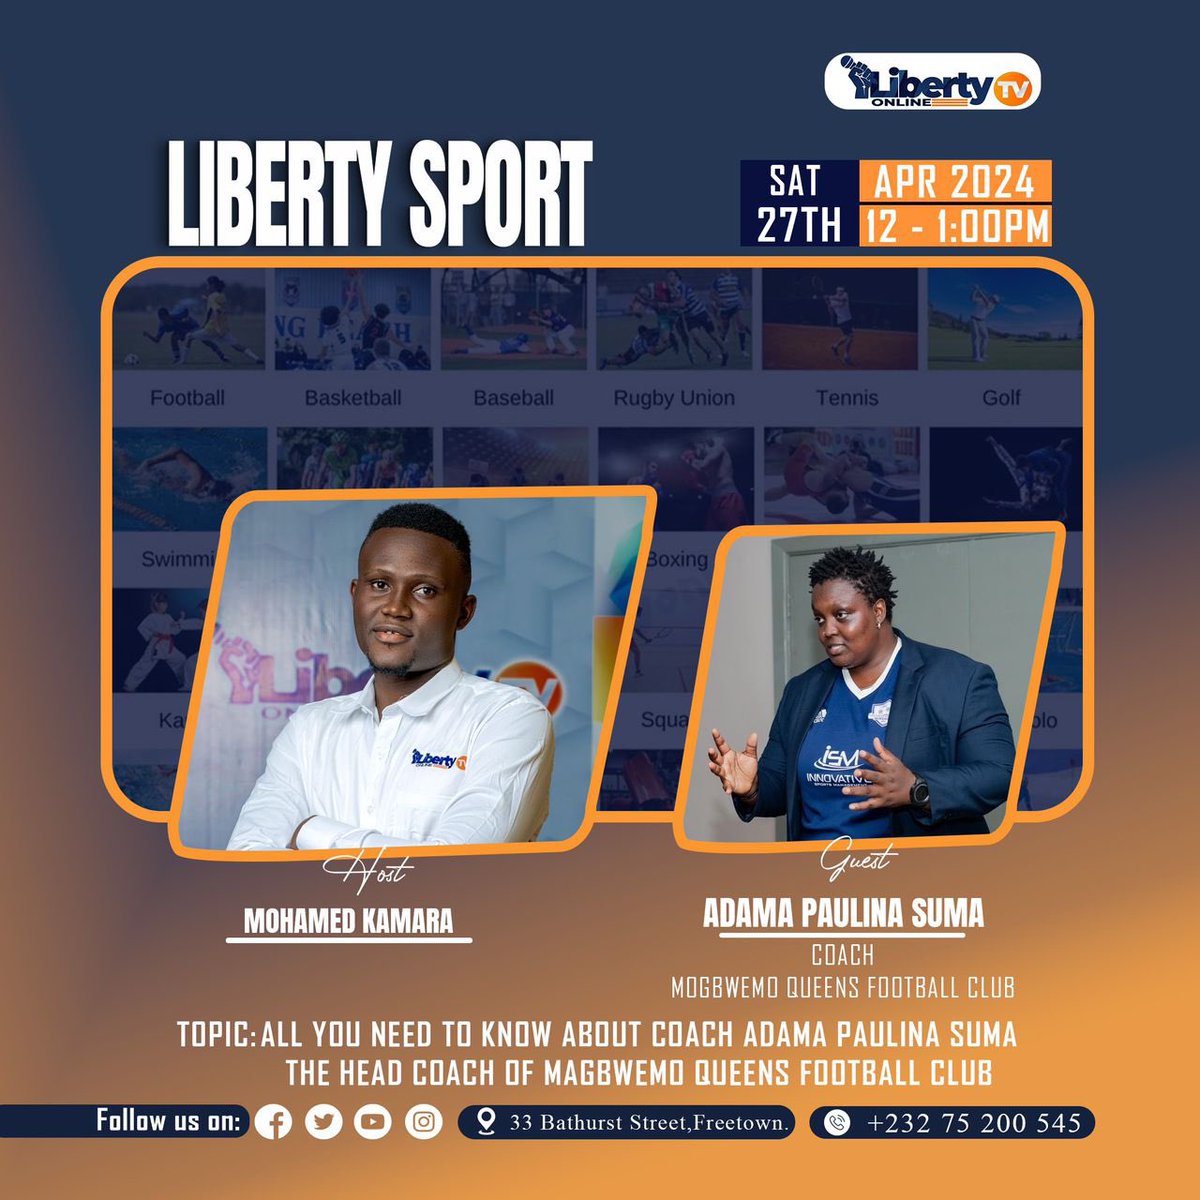 Please join us tomorrow at noon for another installment of the Liberty Sport Program. Coach Adama Paulina Suma will share her inspiring journey in the world of sports. Tune in for the newest sports fixtures, transfers, gossip, analysis, and a range of other sports updates. #SL